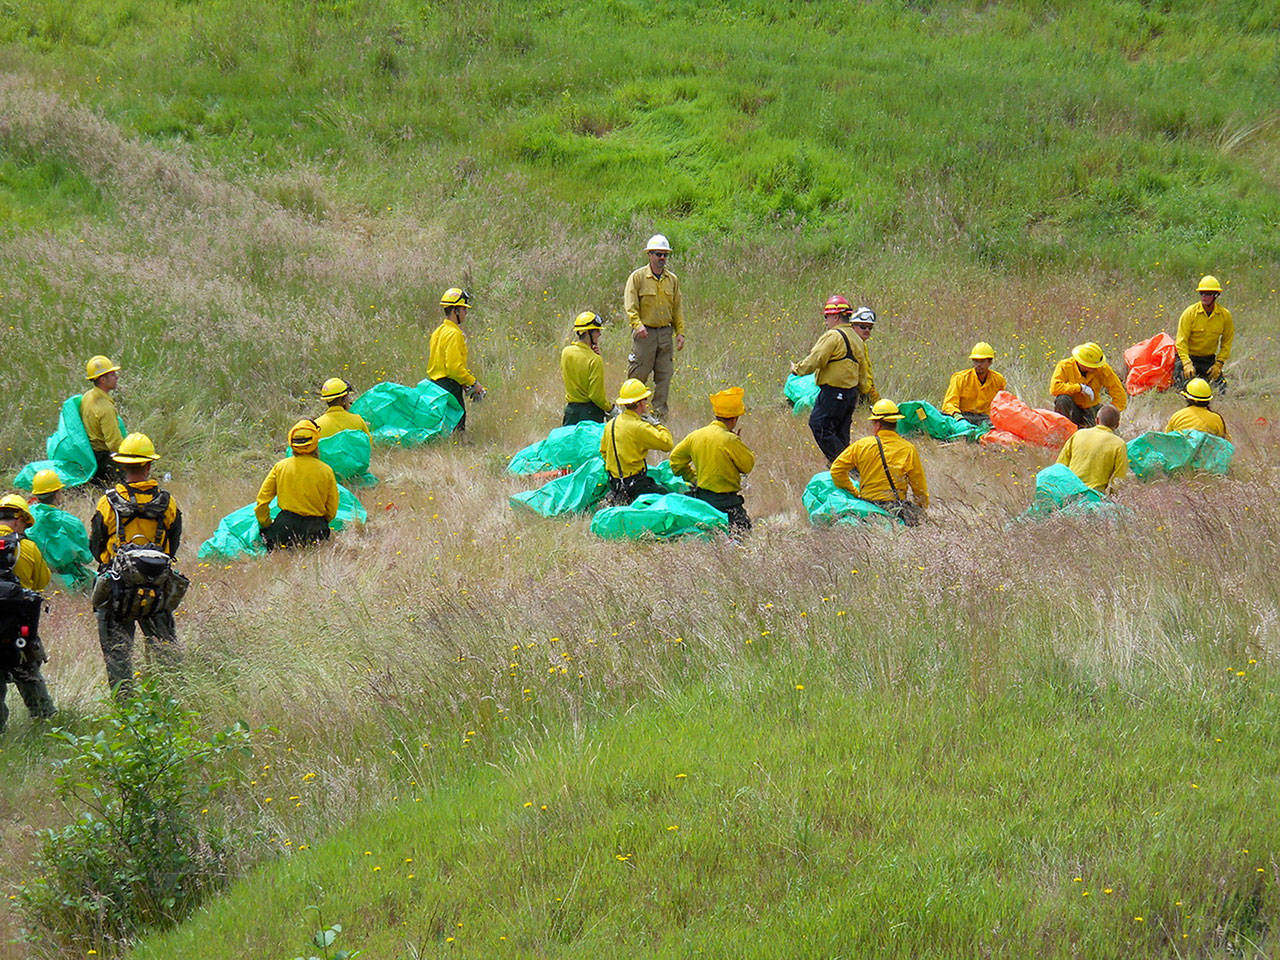 Firefighters practice shelter deployment during a wildland firefighting exercise in Port Ludlow last Saturday. (Port Ludlow Fire & Rescue)